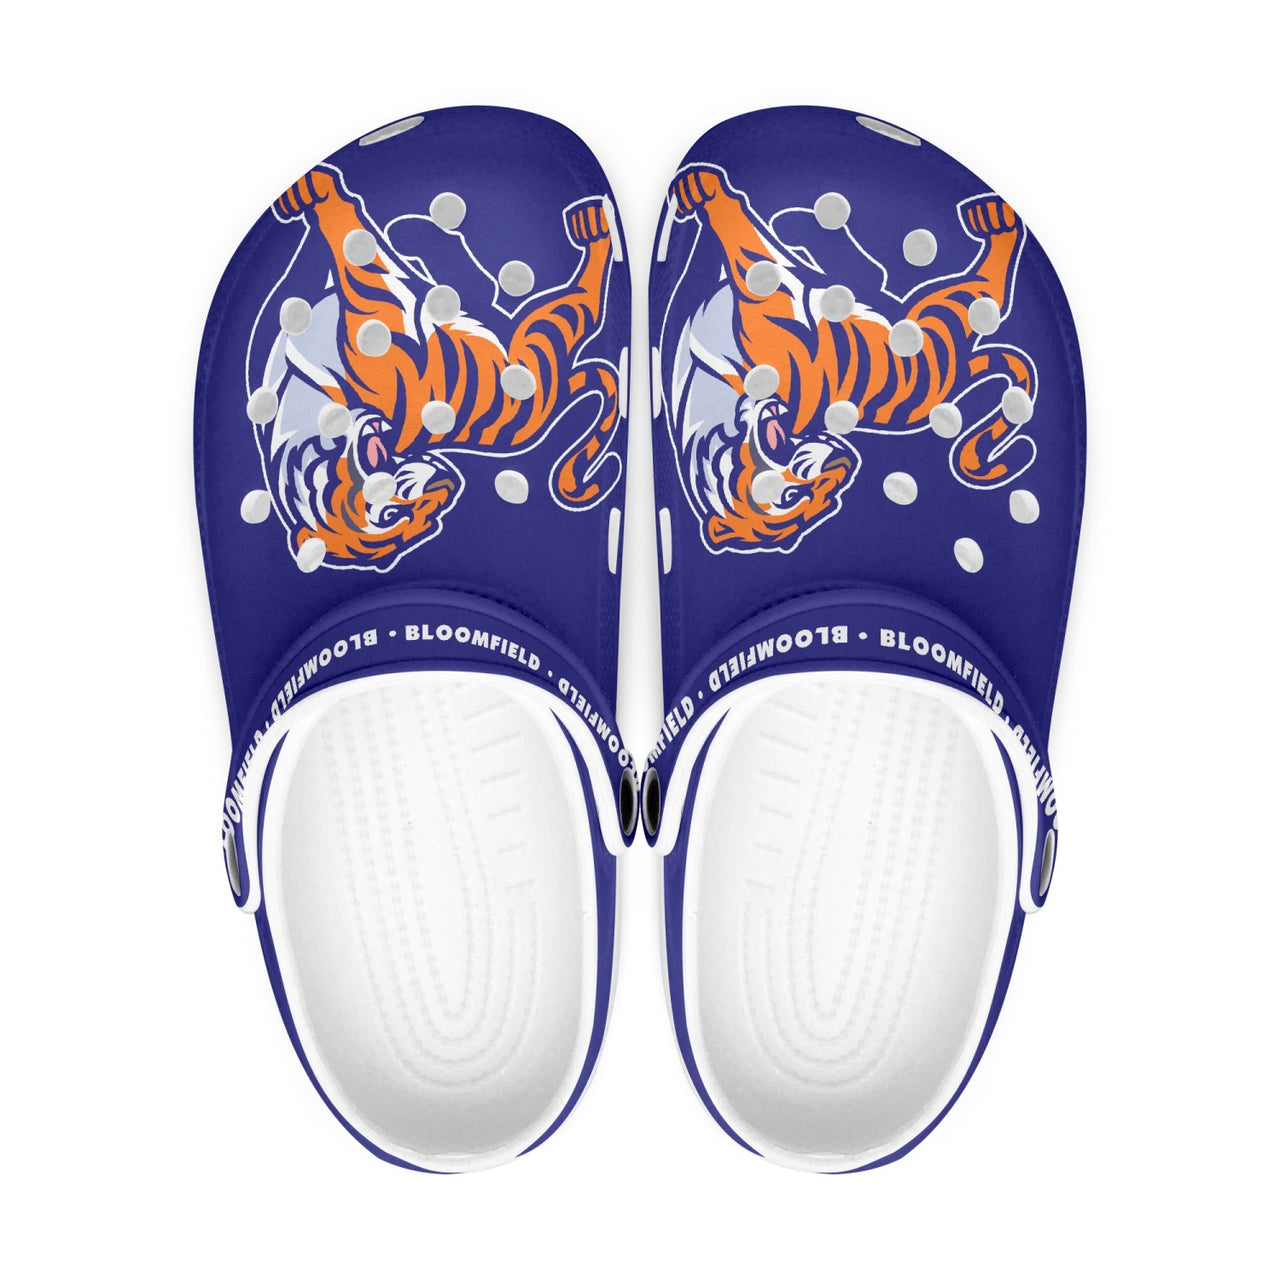 Tiger All Over Printed Clogs